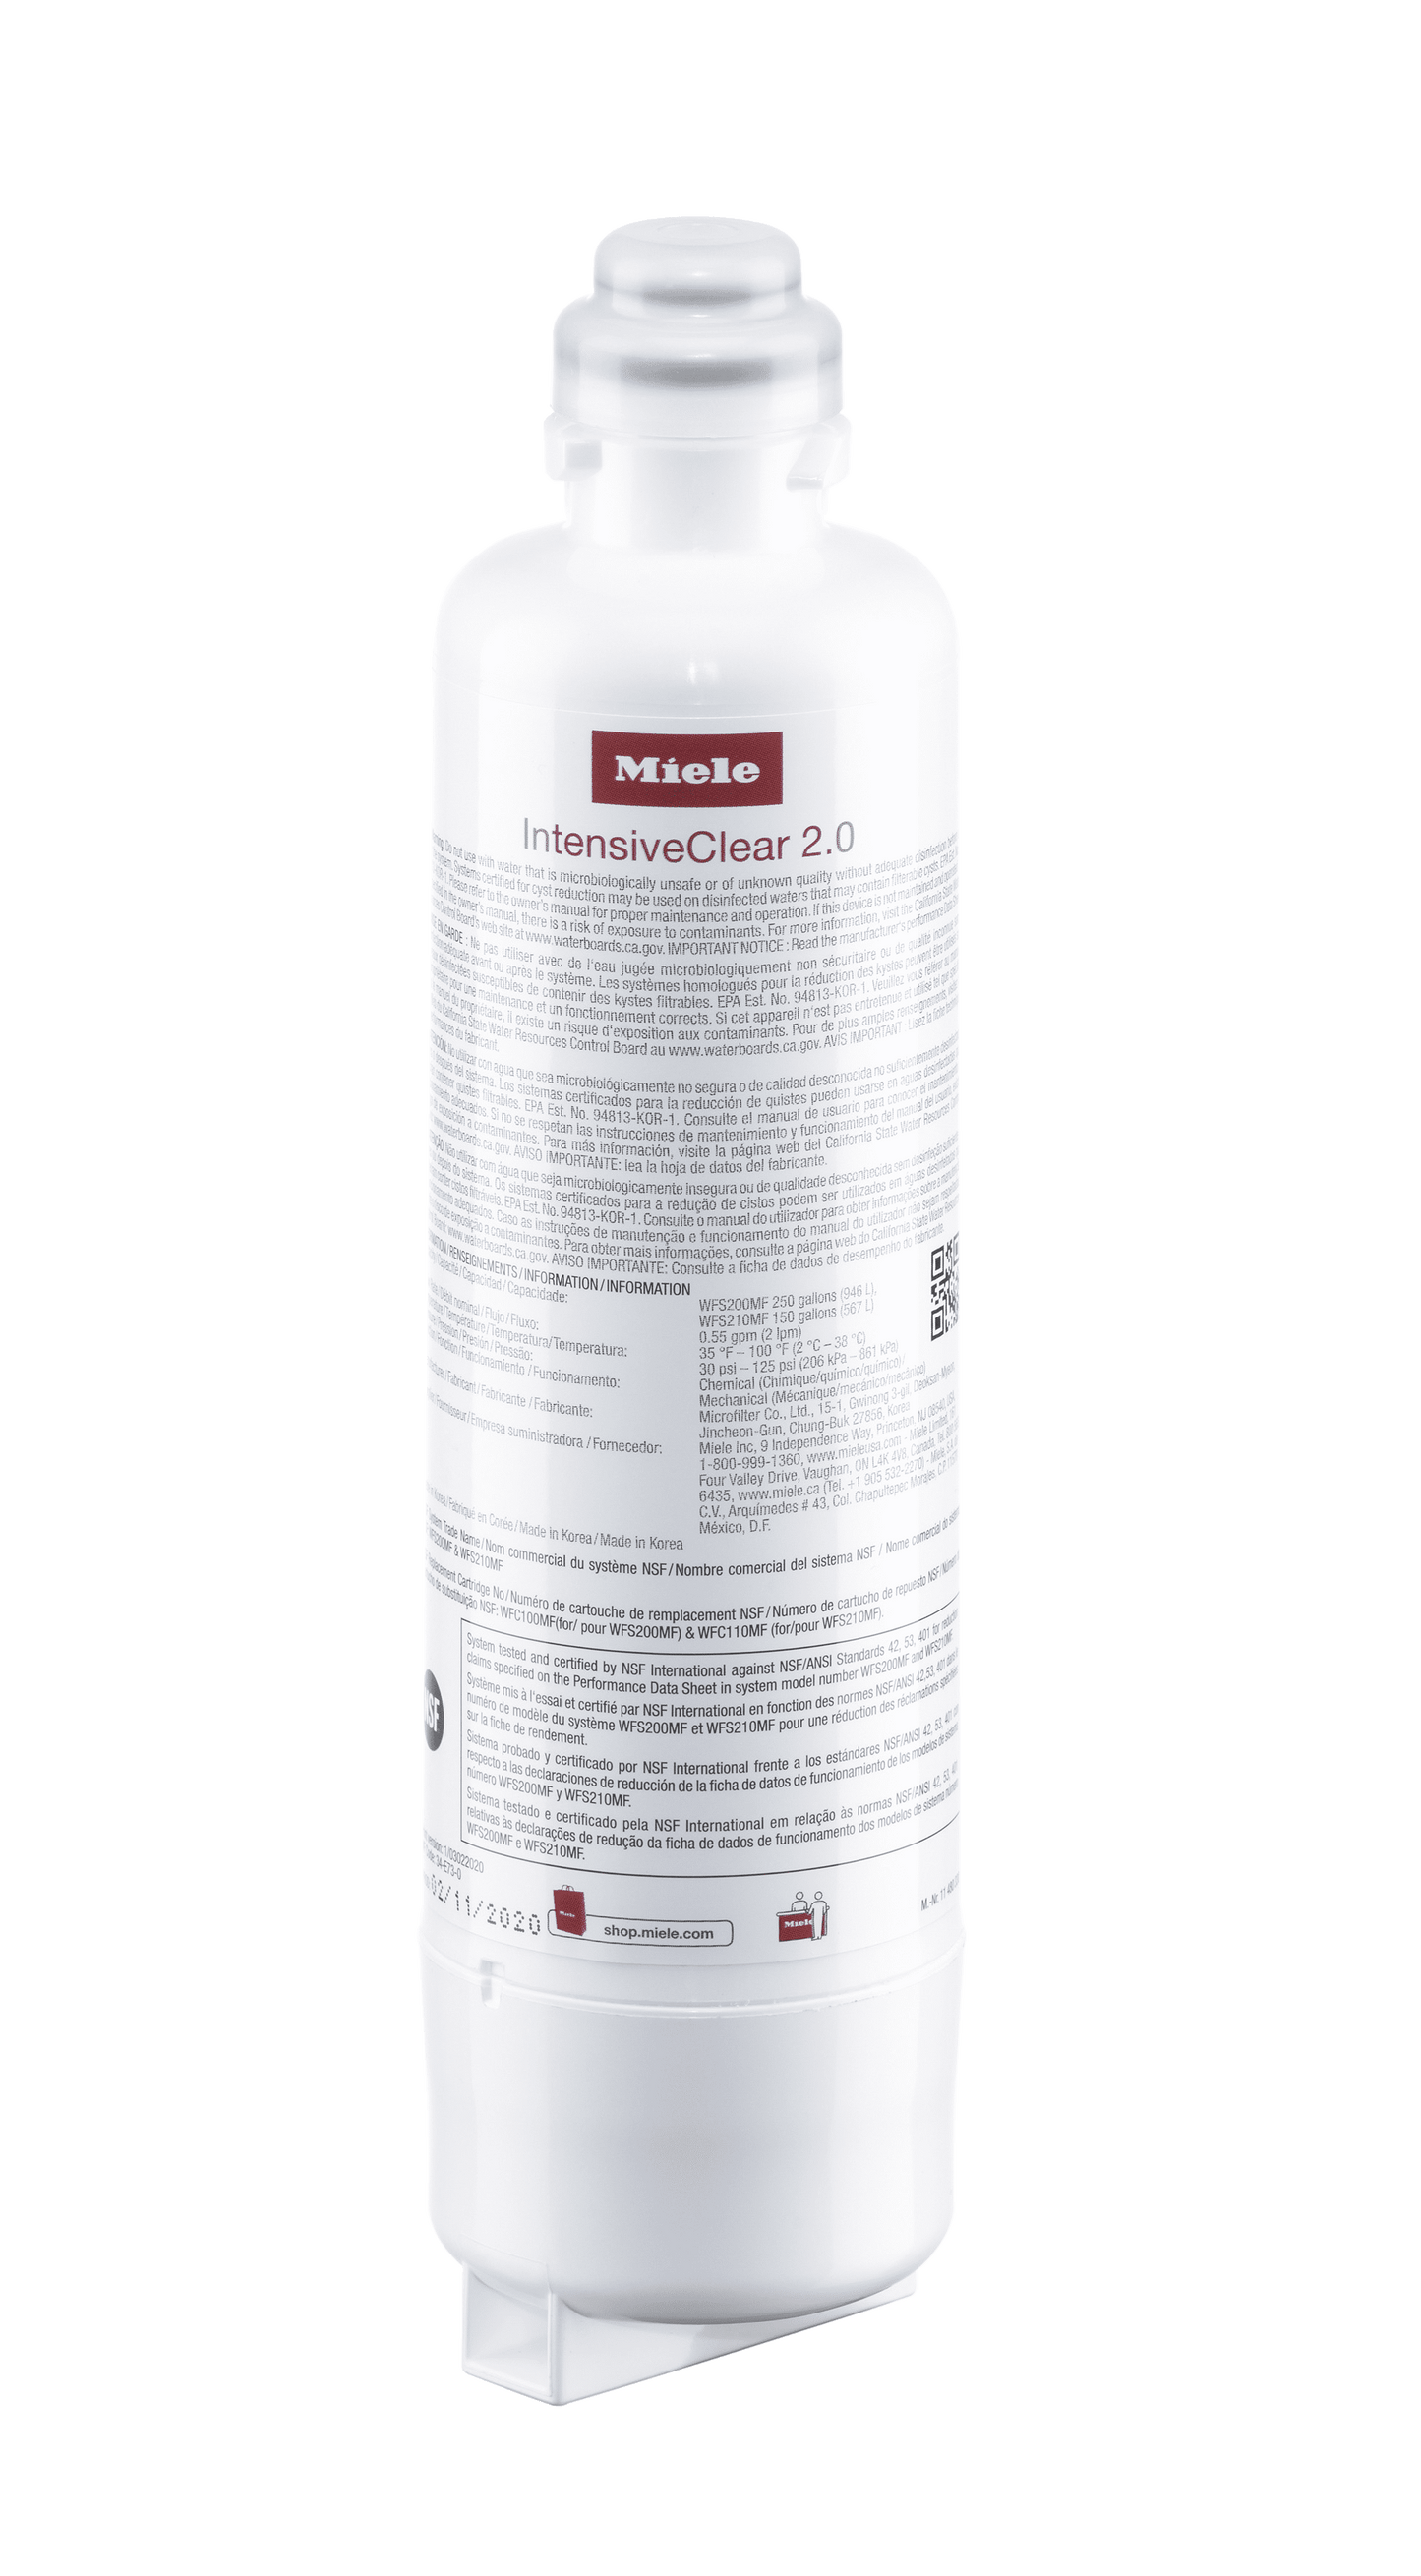 Miele KWF2000 Kwf 2000 - Intensiveclear 2.0 Water Filter With Active Charcoal For Mastercool F 2Xx2 And Kf 2Xx2